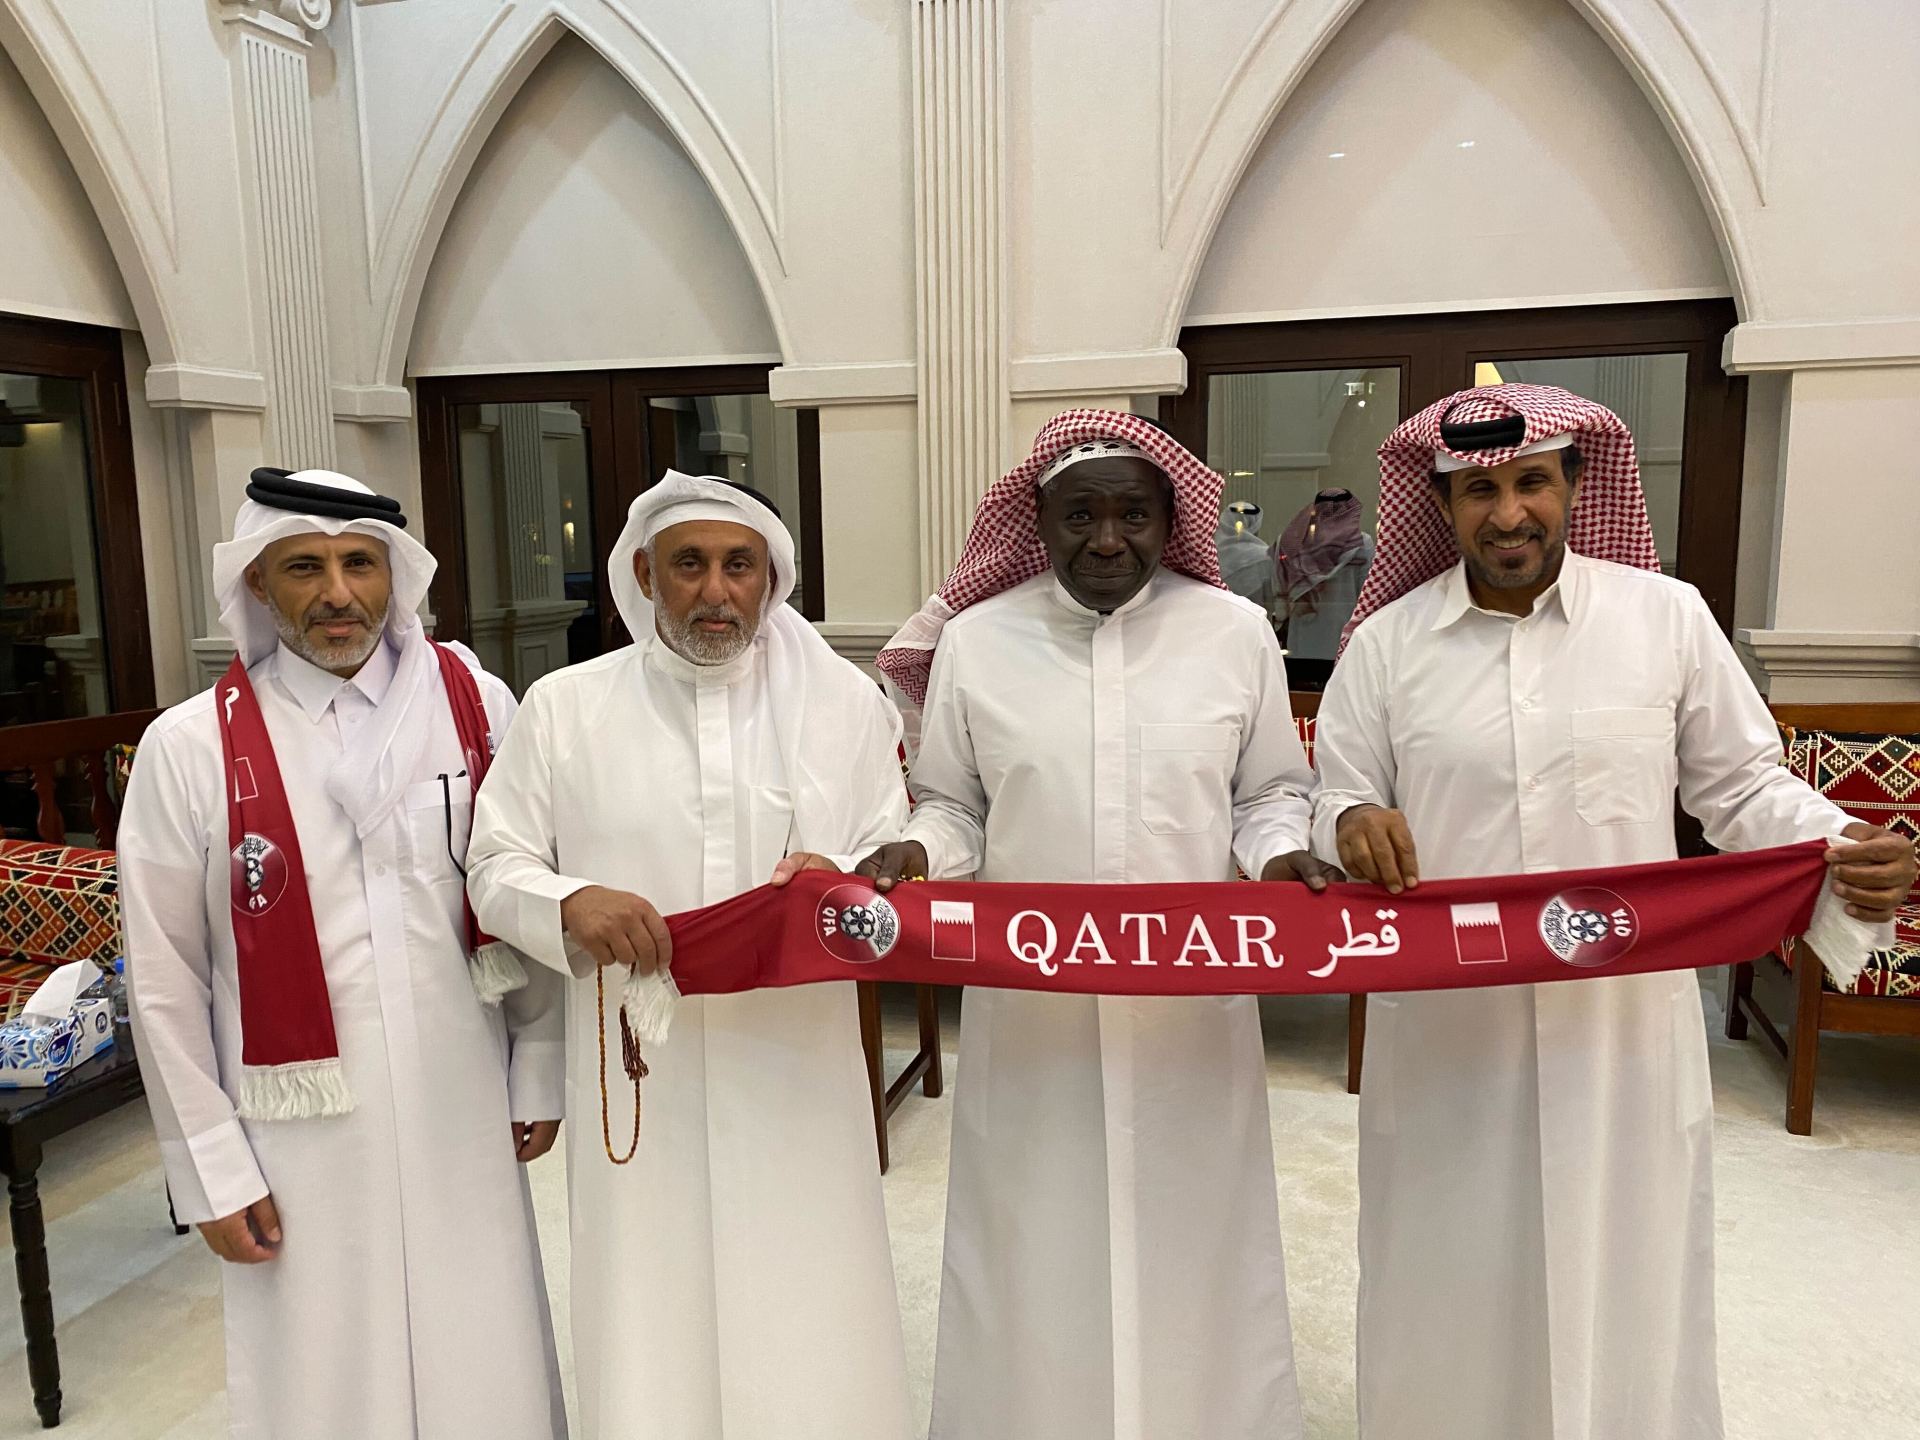 Reflecting on a contemporary Qatar throughout a World Cup recreation with mates